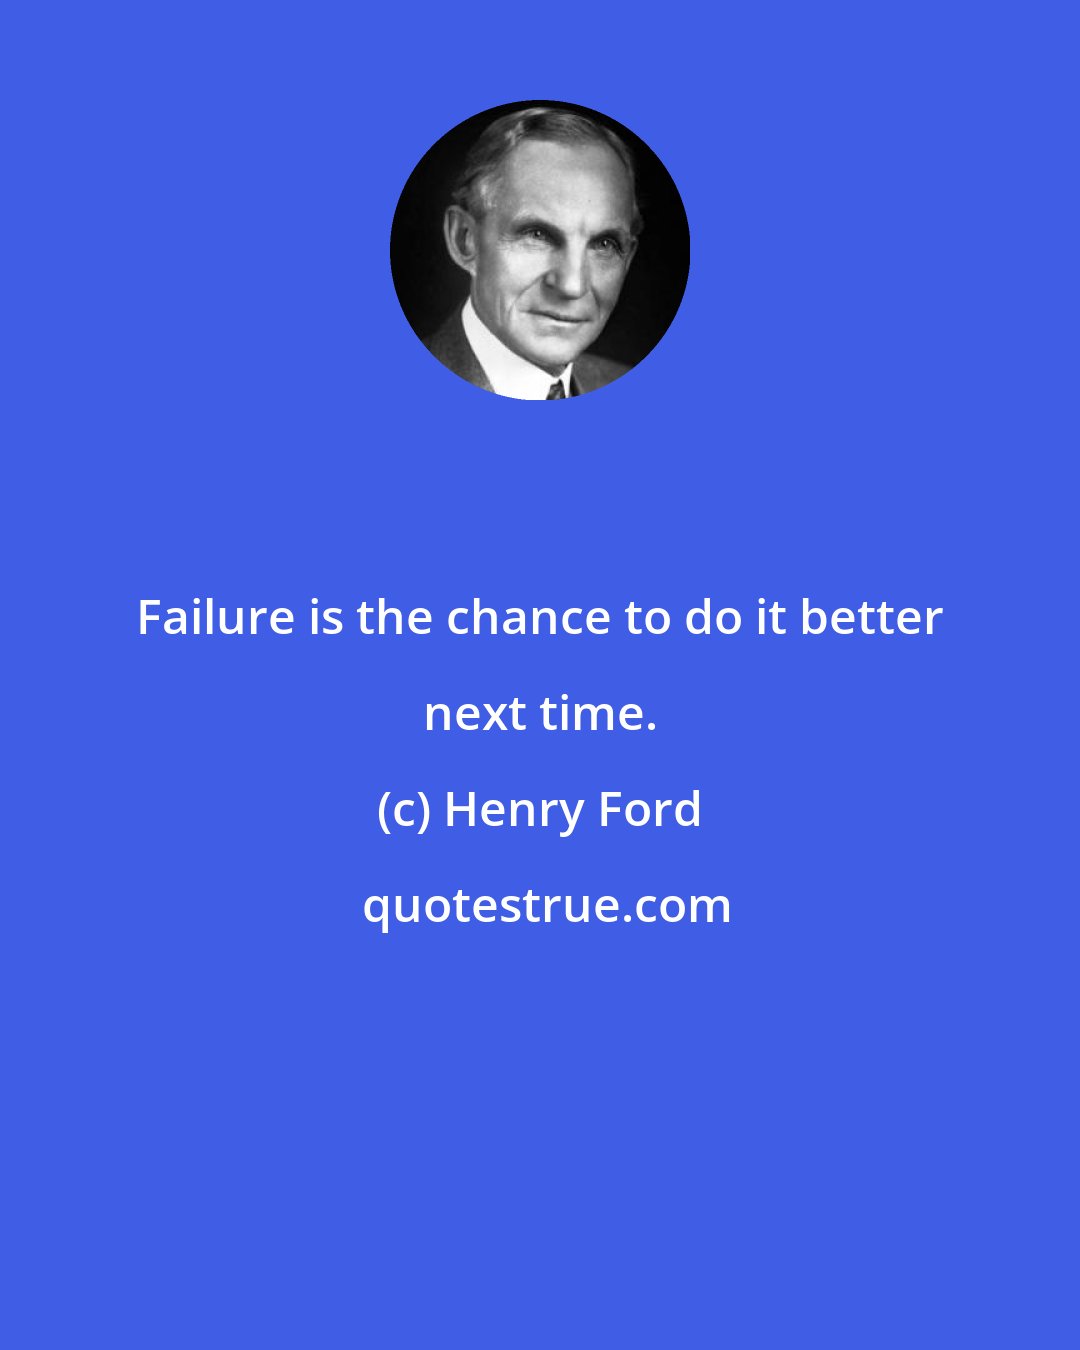 Henry Ford: Failure is the chance to do it better next time.